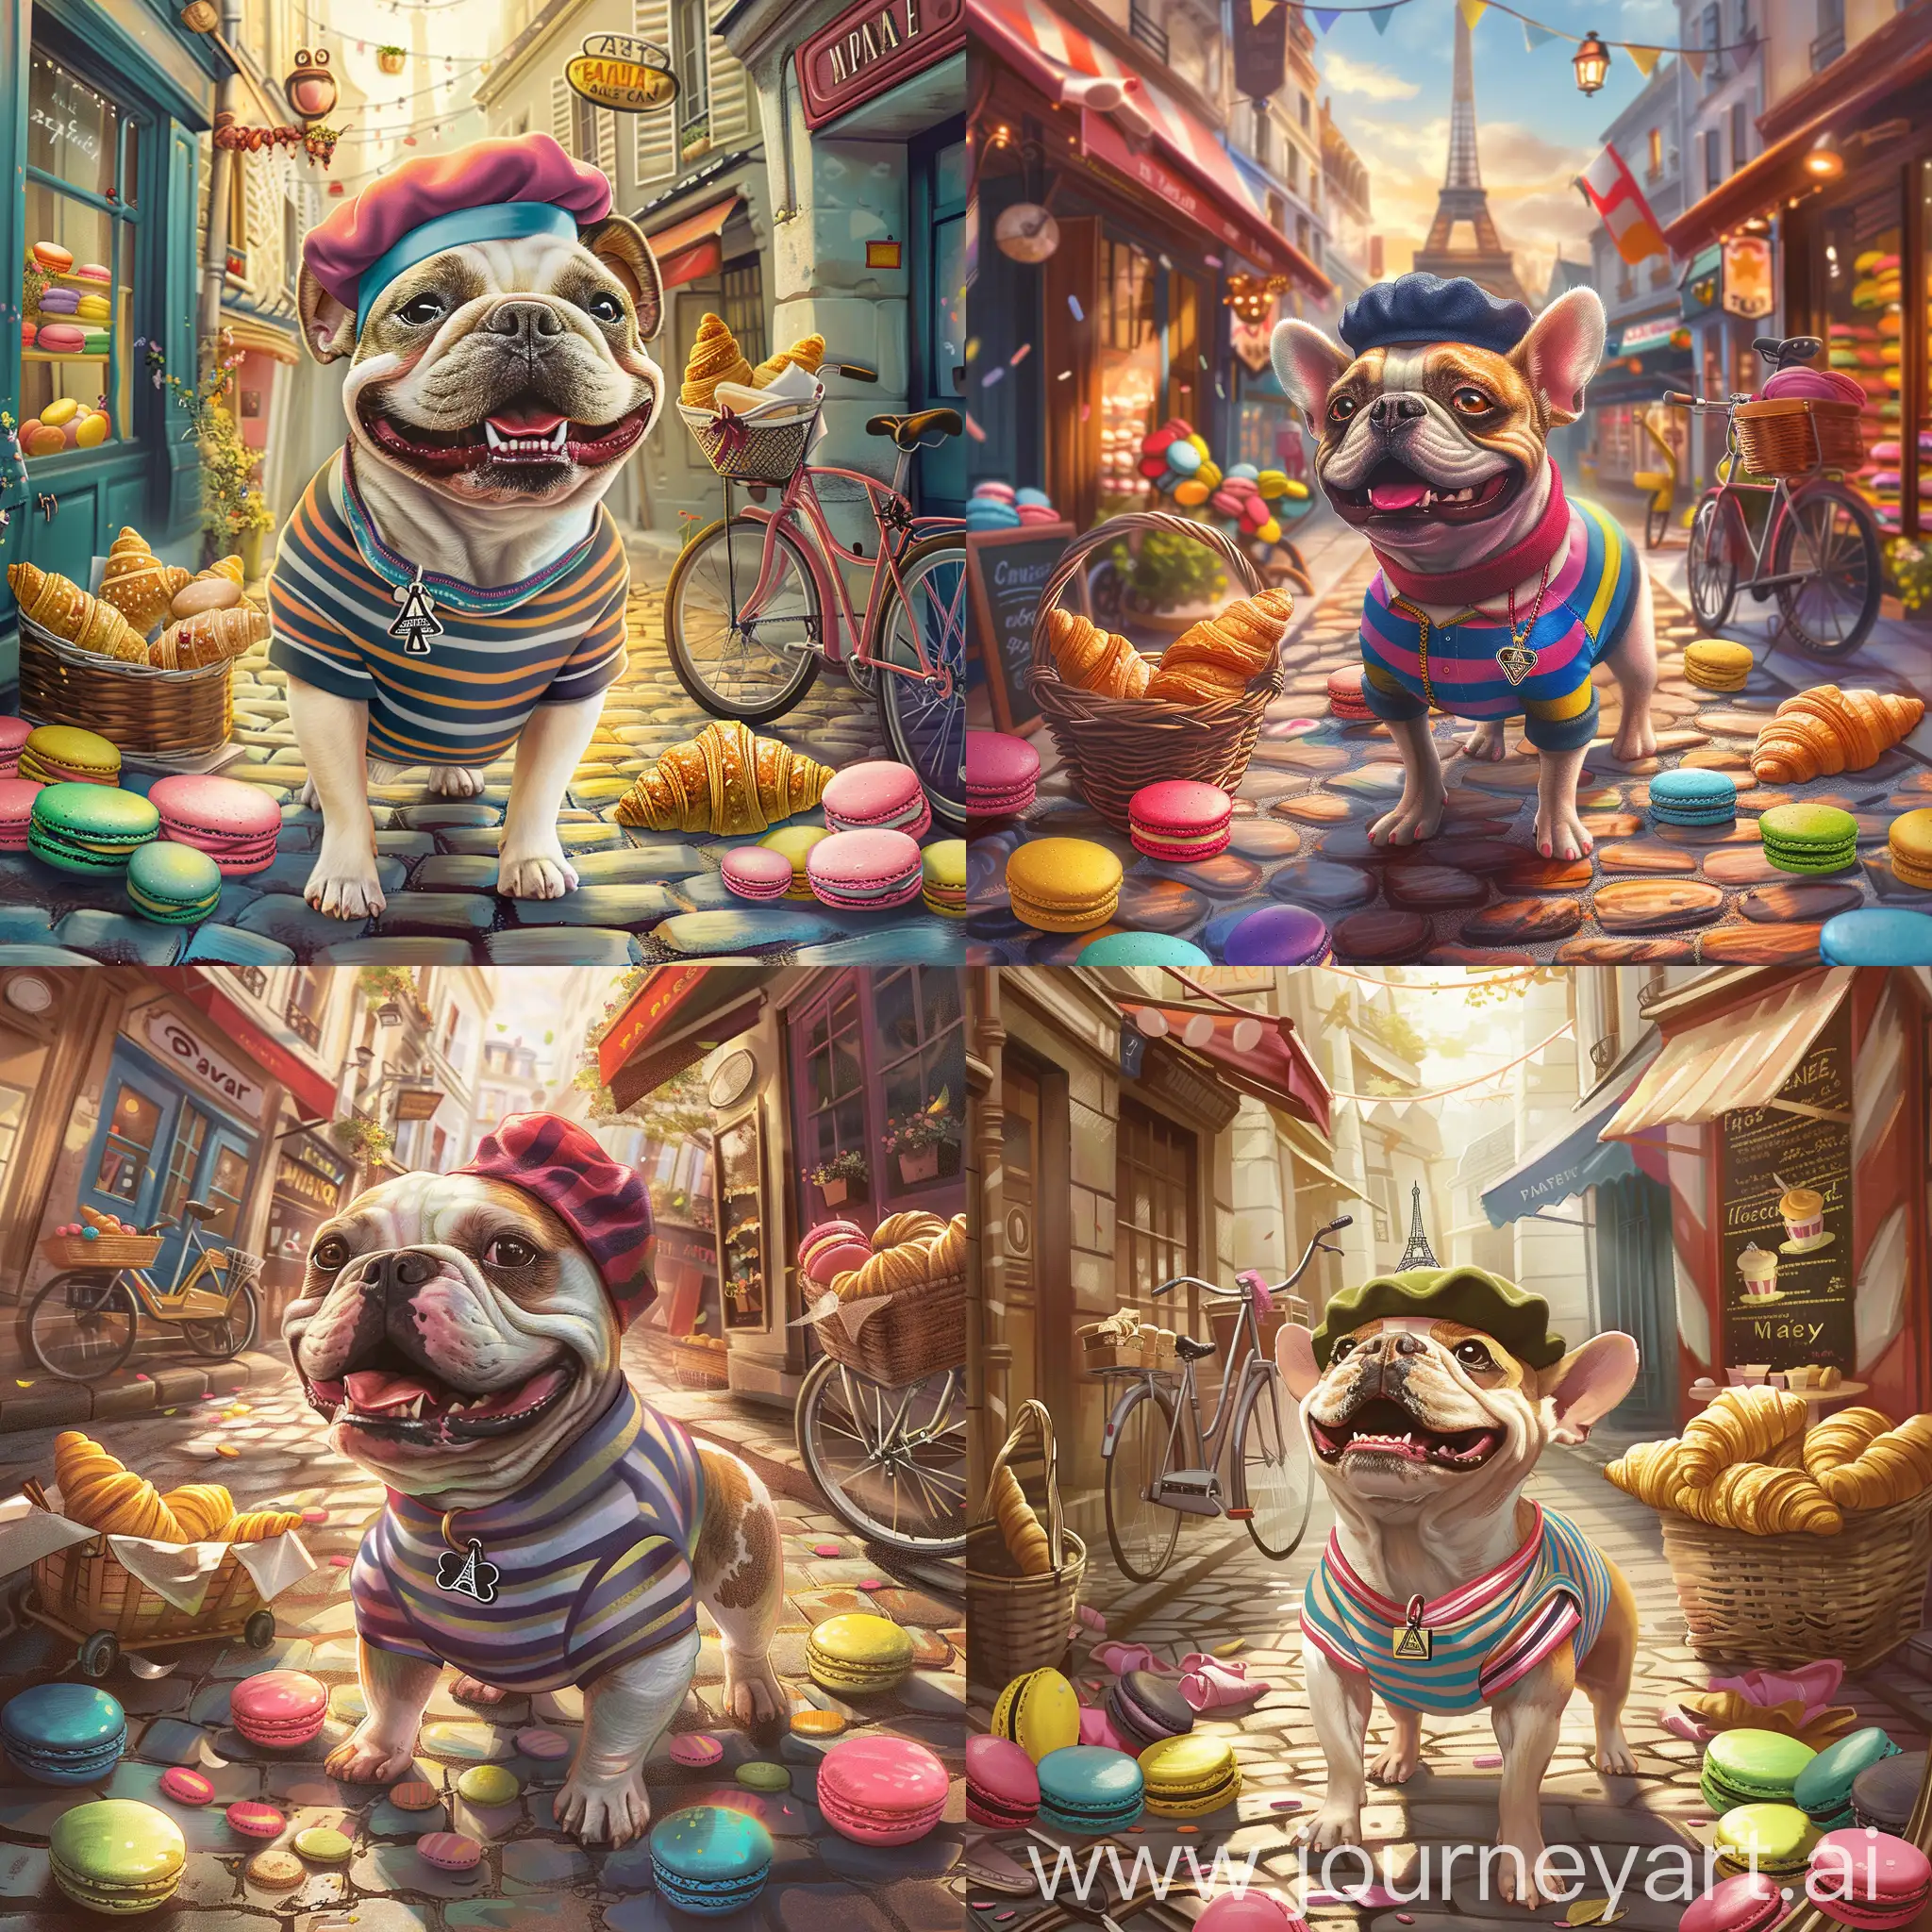 Whimsical-French-Bulldog-in-Parisian-Street-with-Macarons-and-Croissants